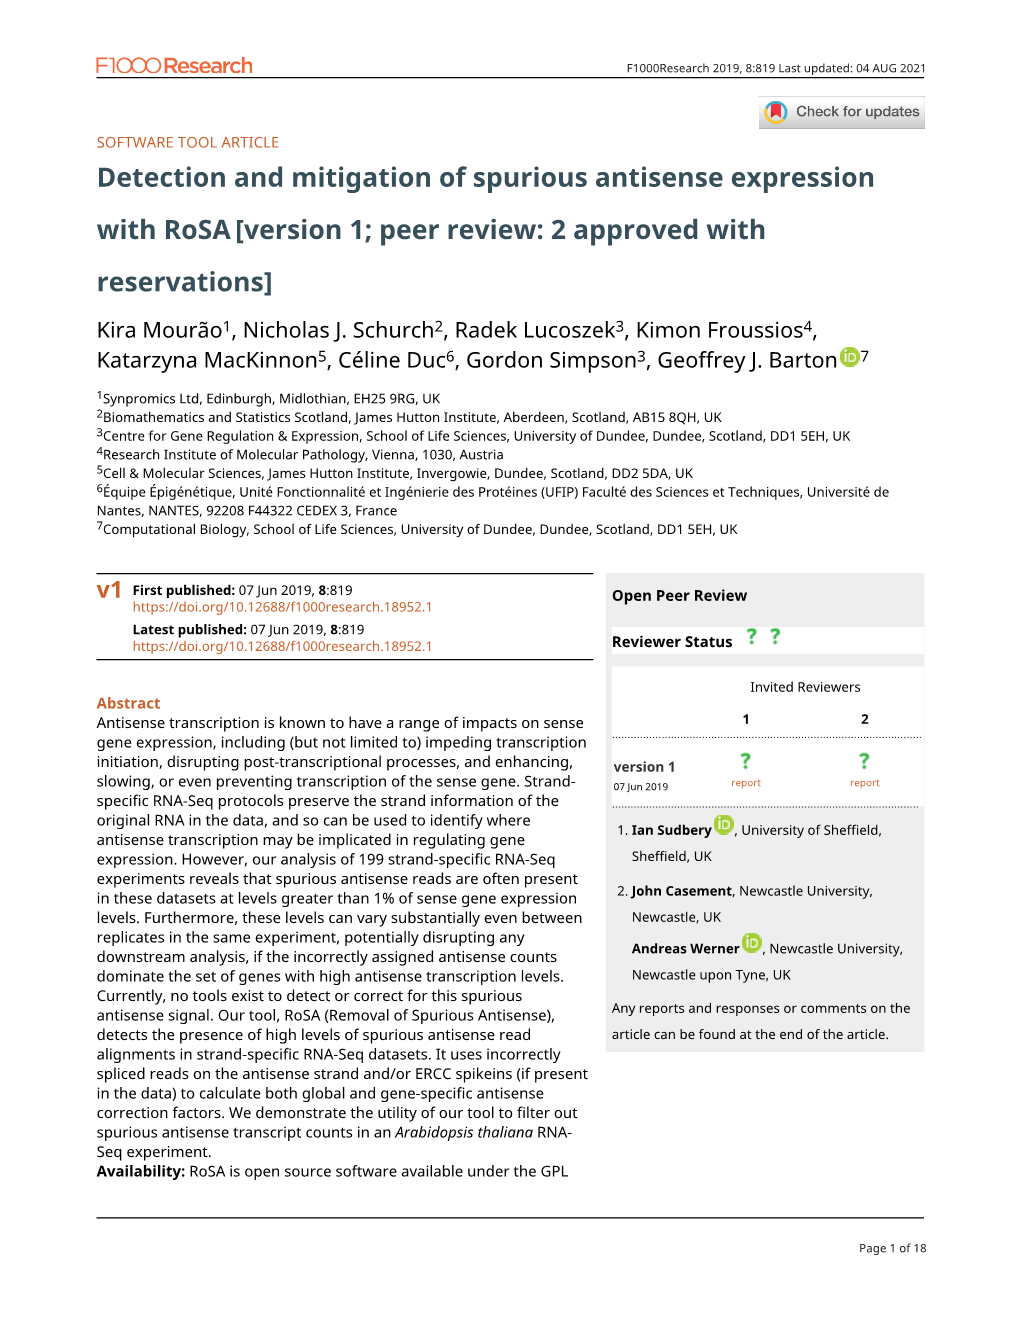 Detection and Mitigation of Spurious Antisense Expression with Rosa [Version 1; Peer Review: 2 Approved with Reservations]